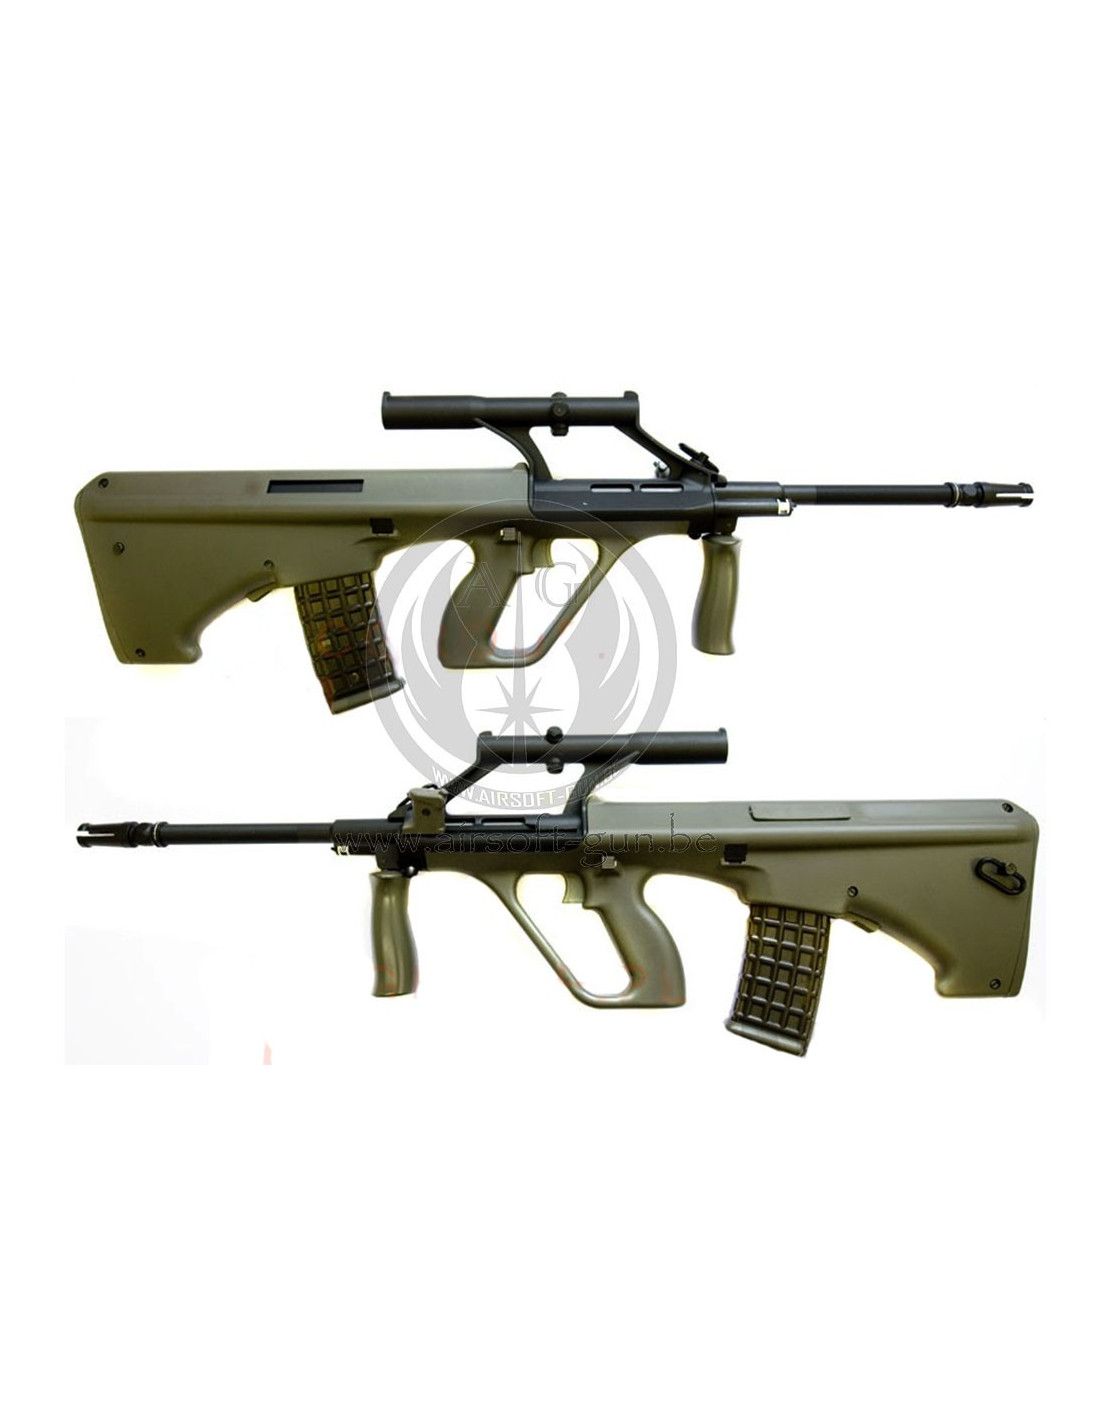 Jing Gong Steyr Aug A1 Military